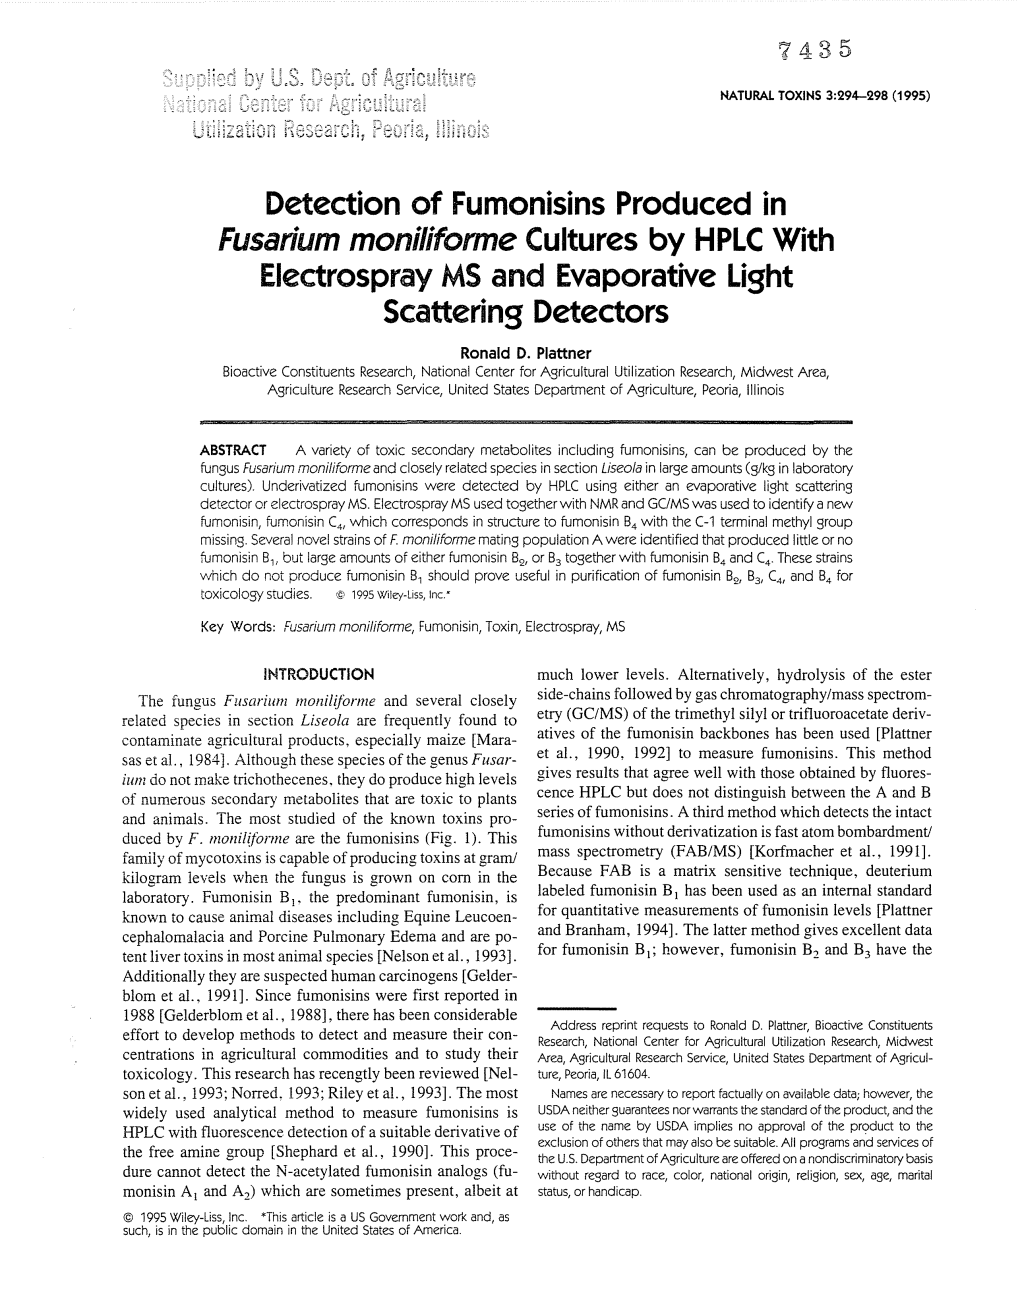 Detection of Fumonisins Produced in Fusarium Moniliforme Cultures by HPLC with Eleetrospray MS and Evaporative Light Scattering Detectors